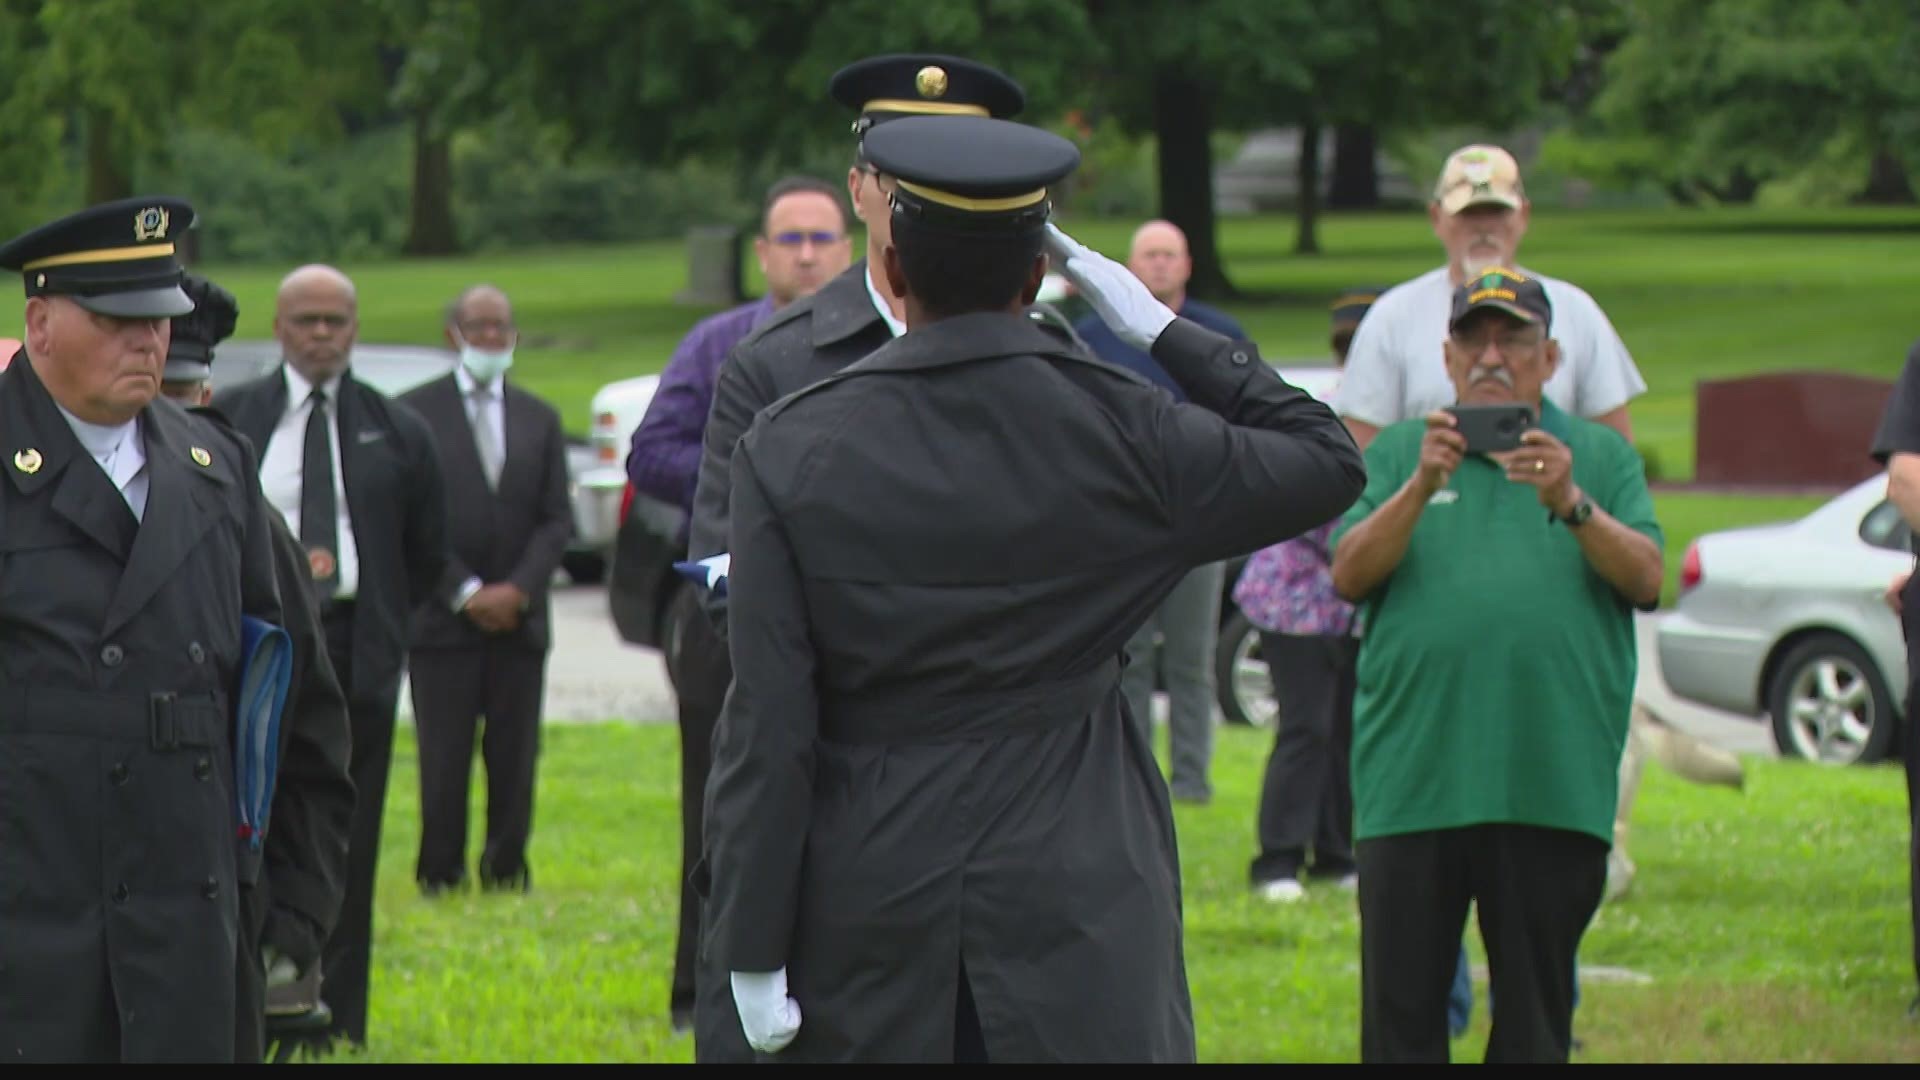 The organization that renders military honors said they are in desperate need of volunteers as the demand continues to increase in the Indianapolis area.